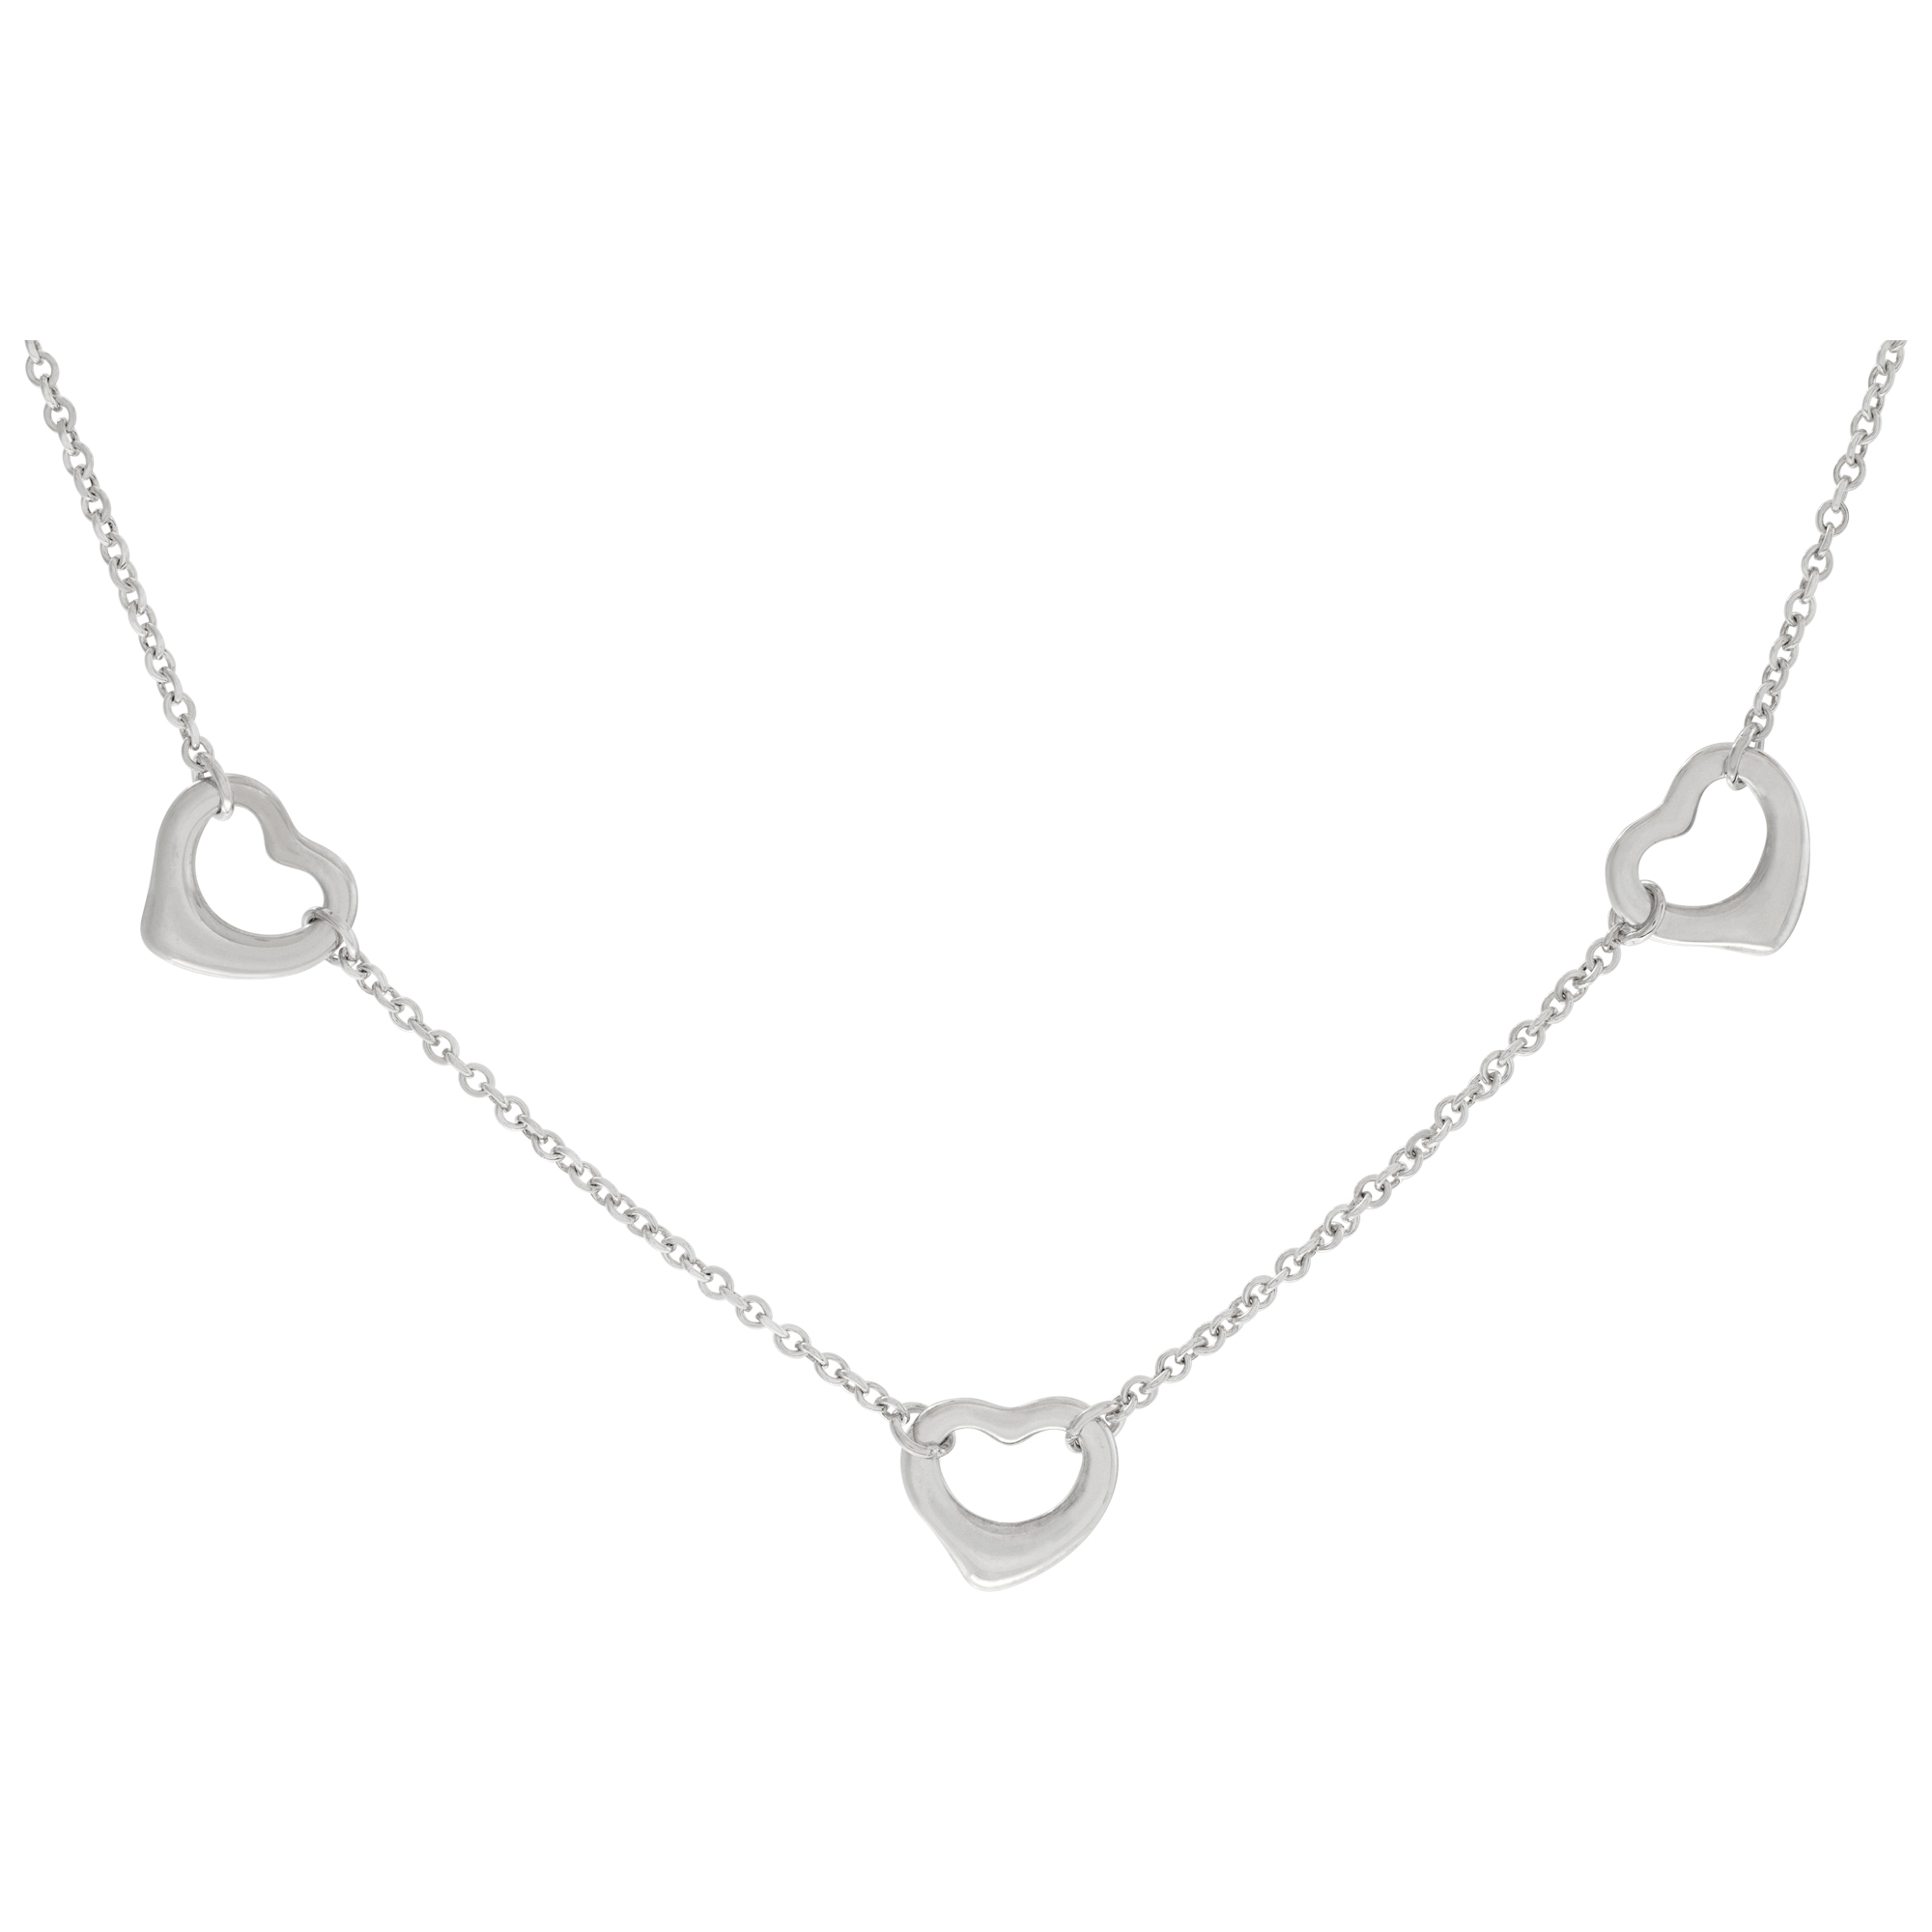 Tiffany & Co Sterling Silver Necklace With Hearts.